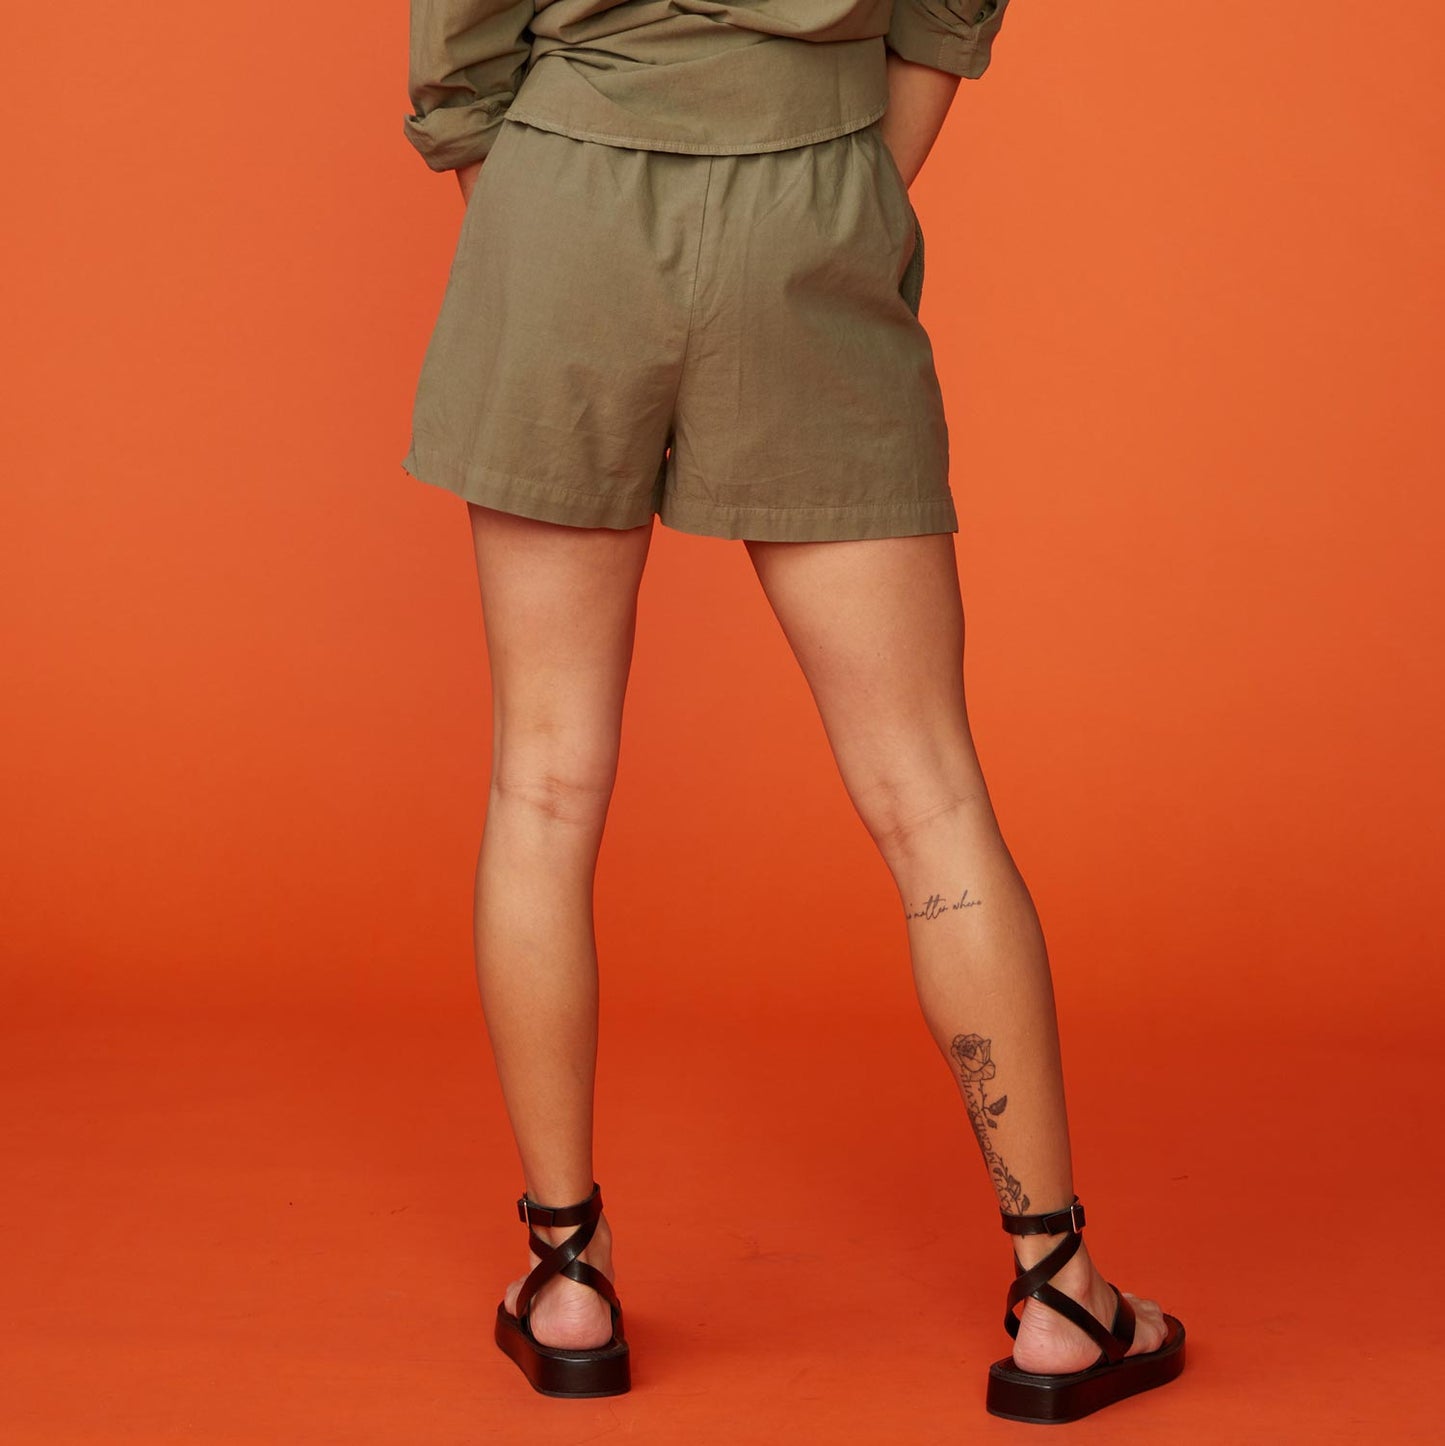 Back view of model wearing the poplin shorts in Army